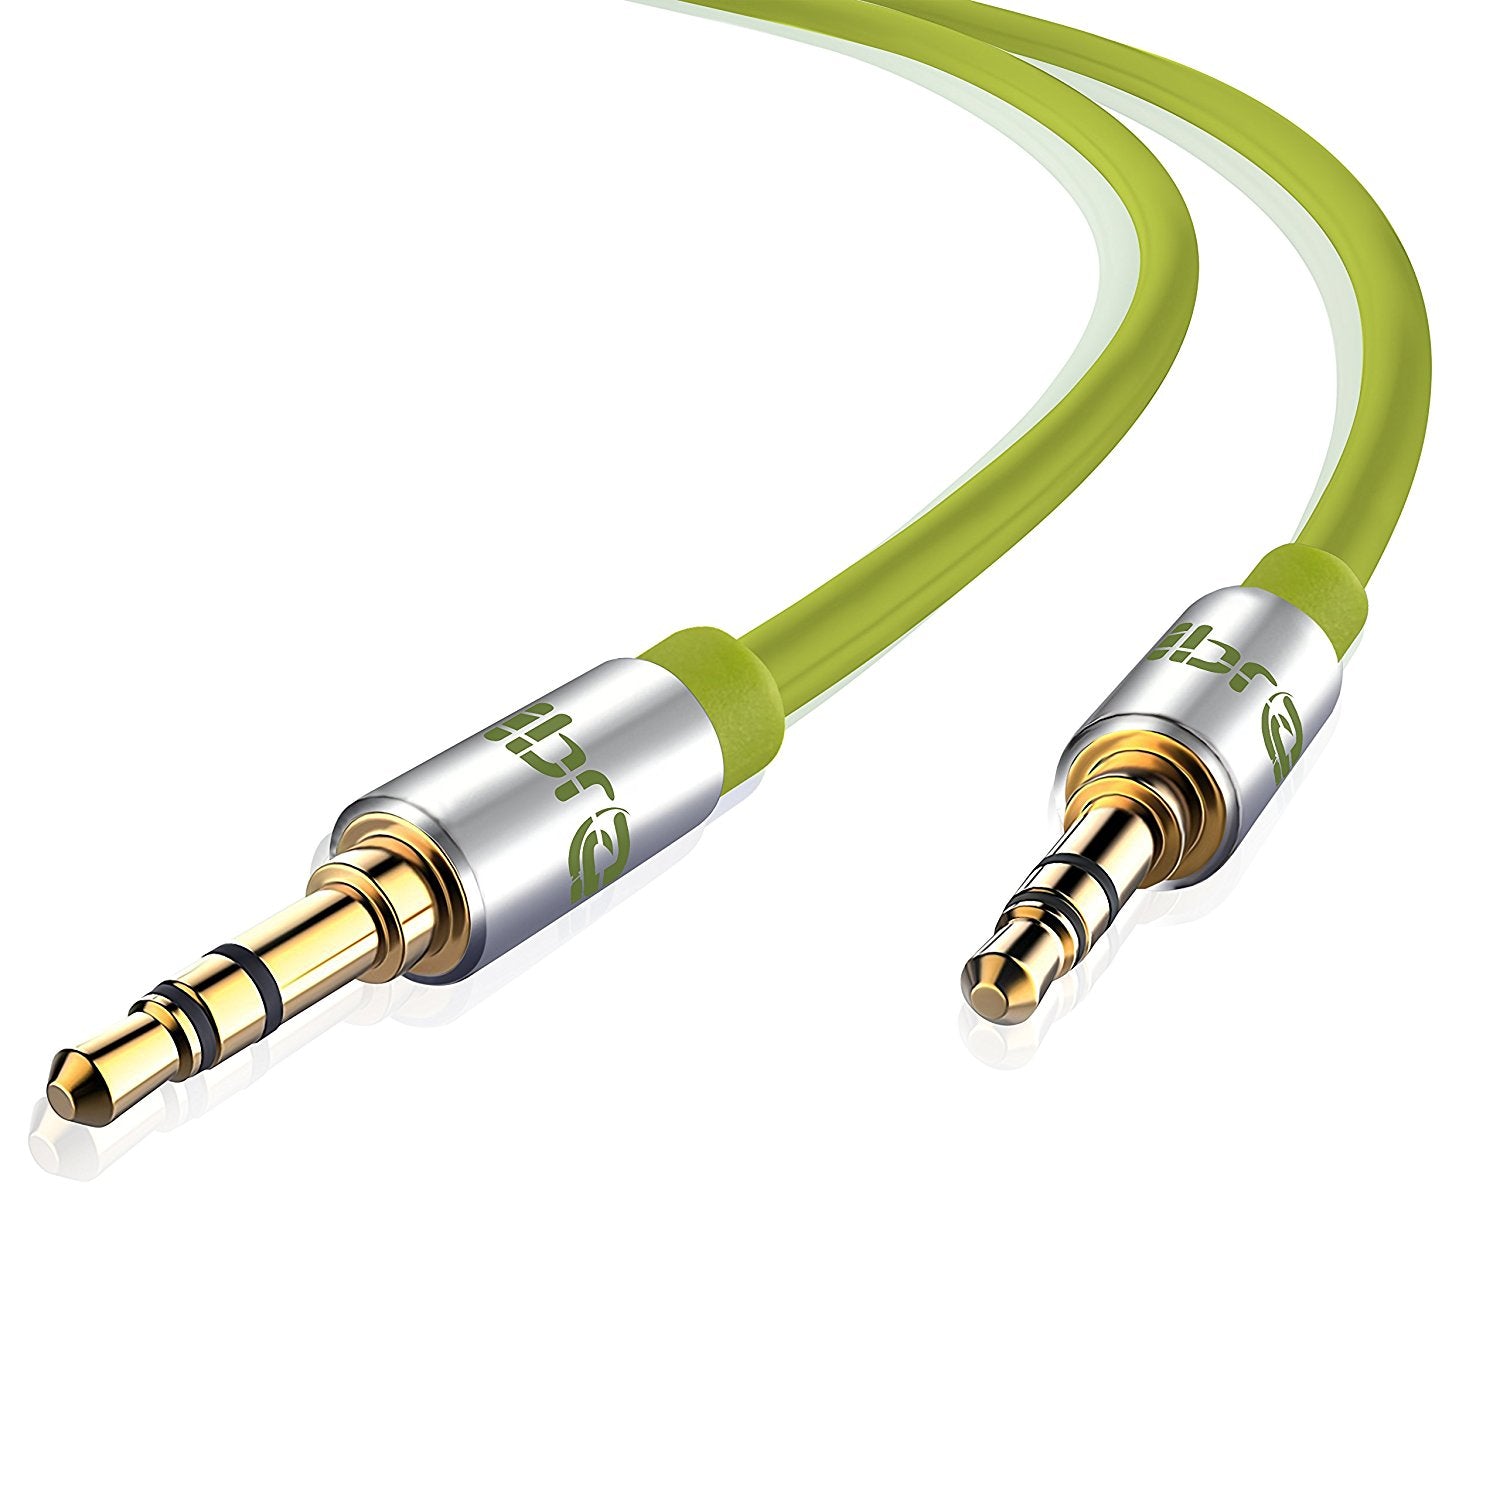 Aux Cable 3M 3.5mm Stereo Pro Auxiliary Audio Cable - for Beats Headphones Apple iPod iPhone iPad Samsung LG Smartphone MP3 Player Home / Car etc - IBRA Green